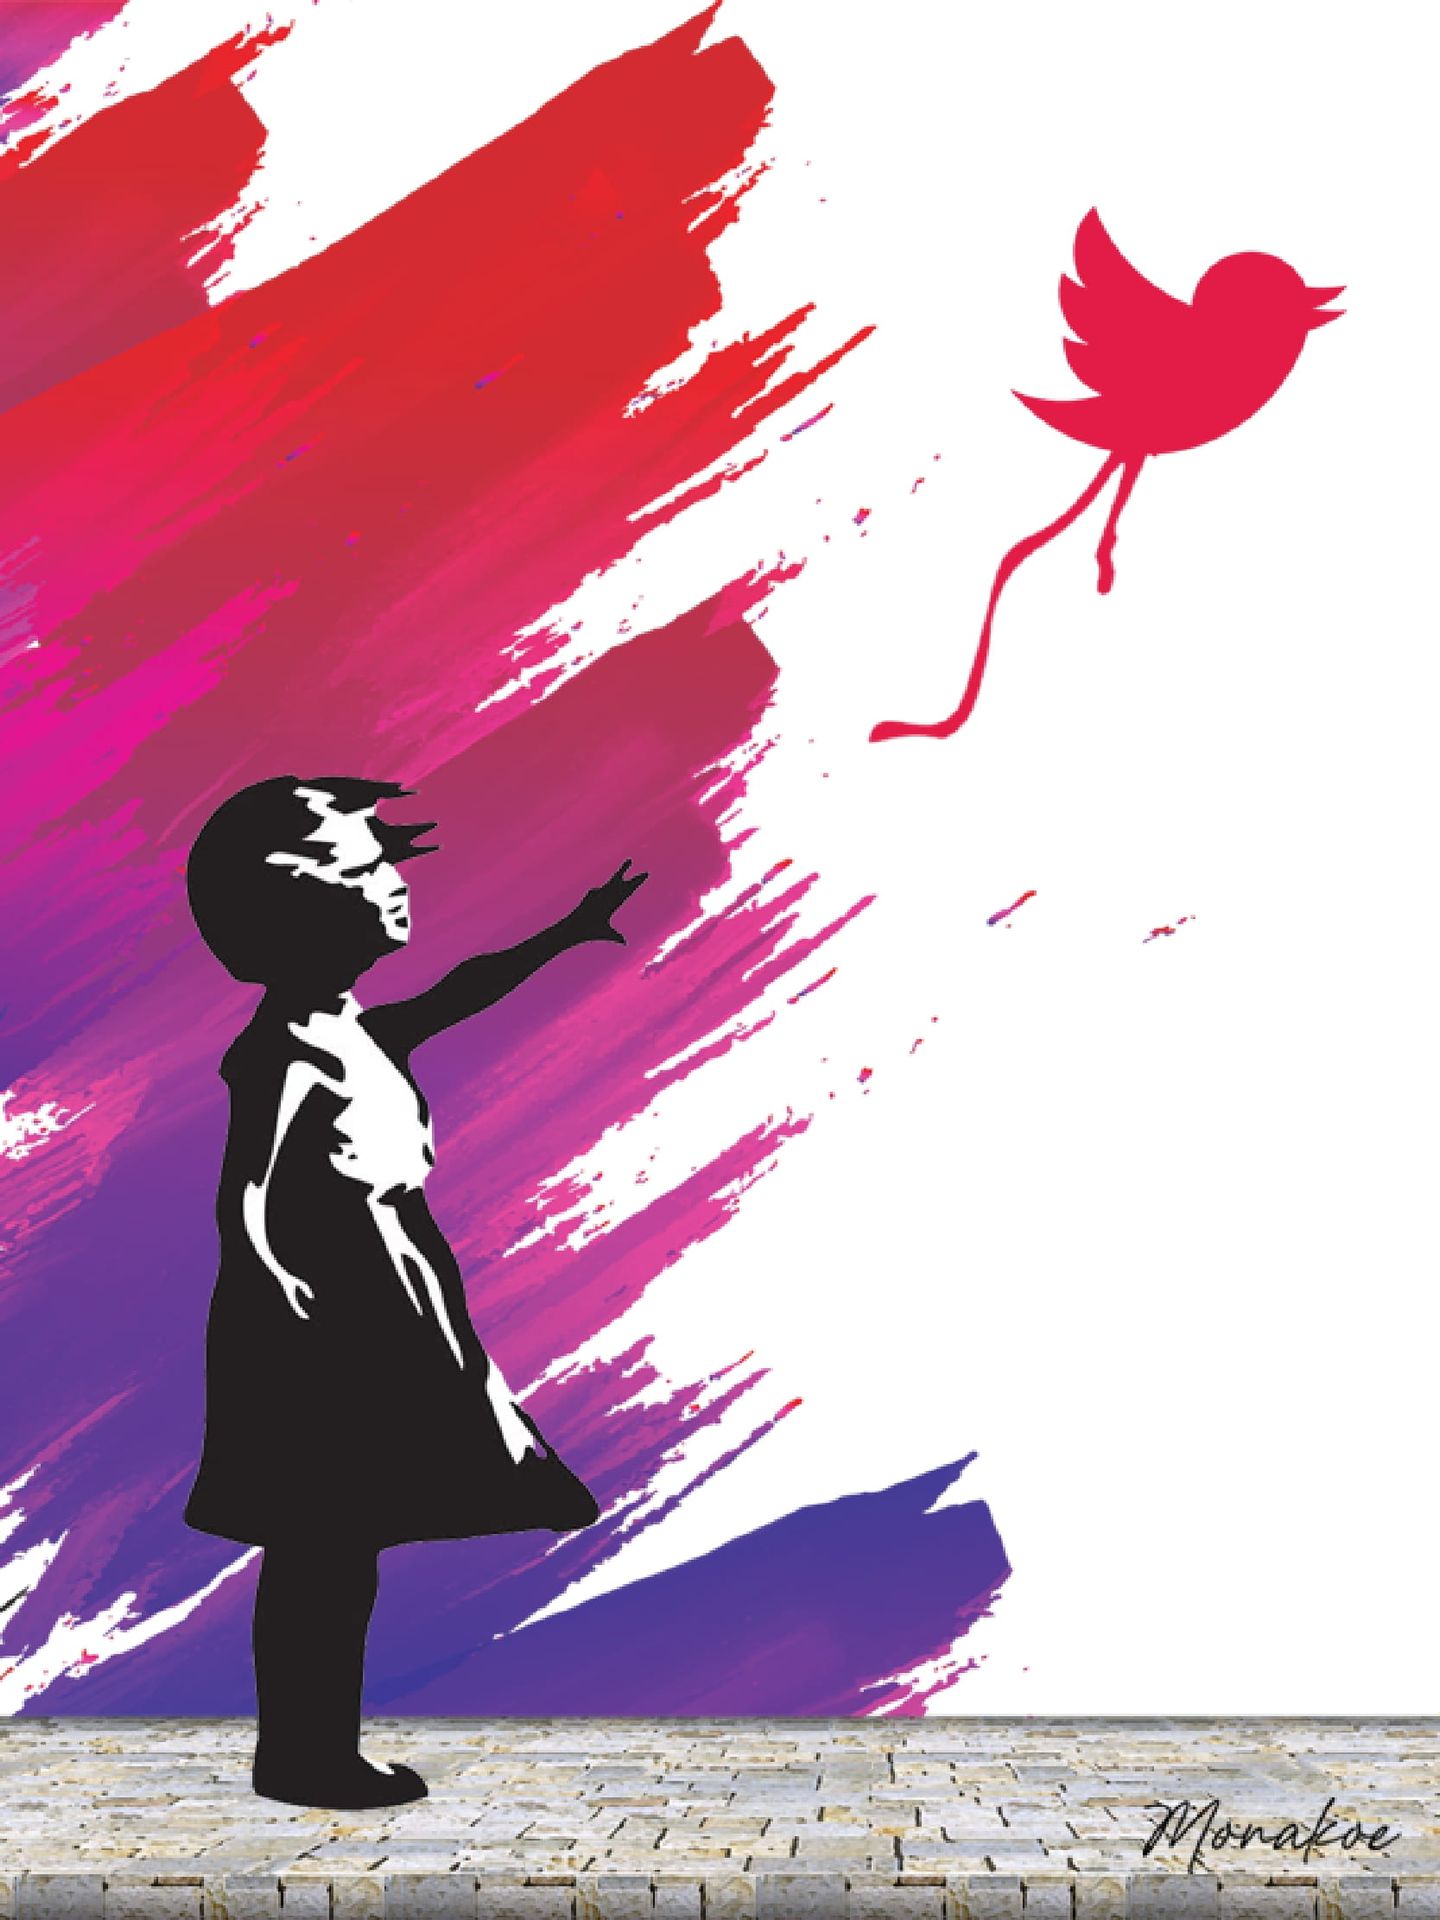 Null Twitter Balloon Girl, inspired by Banksy's character, Monakoe, acrylic glas&hellip;